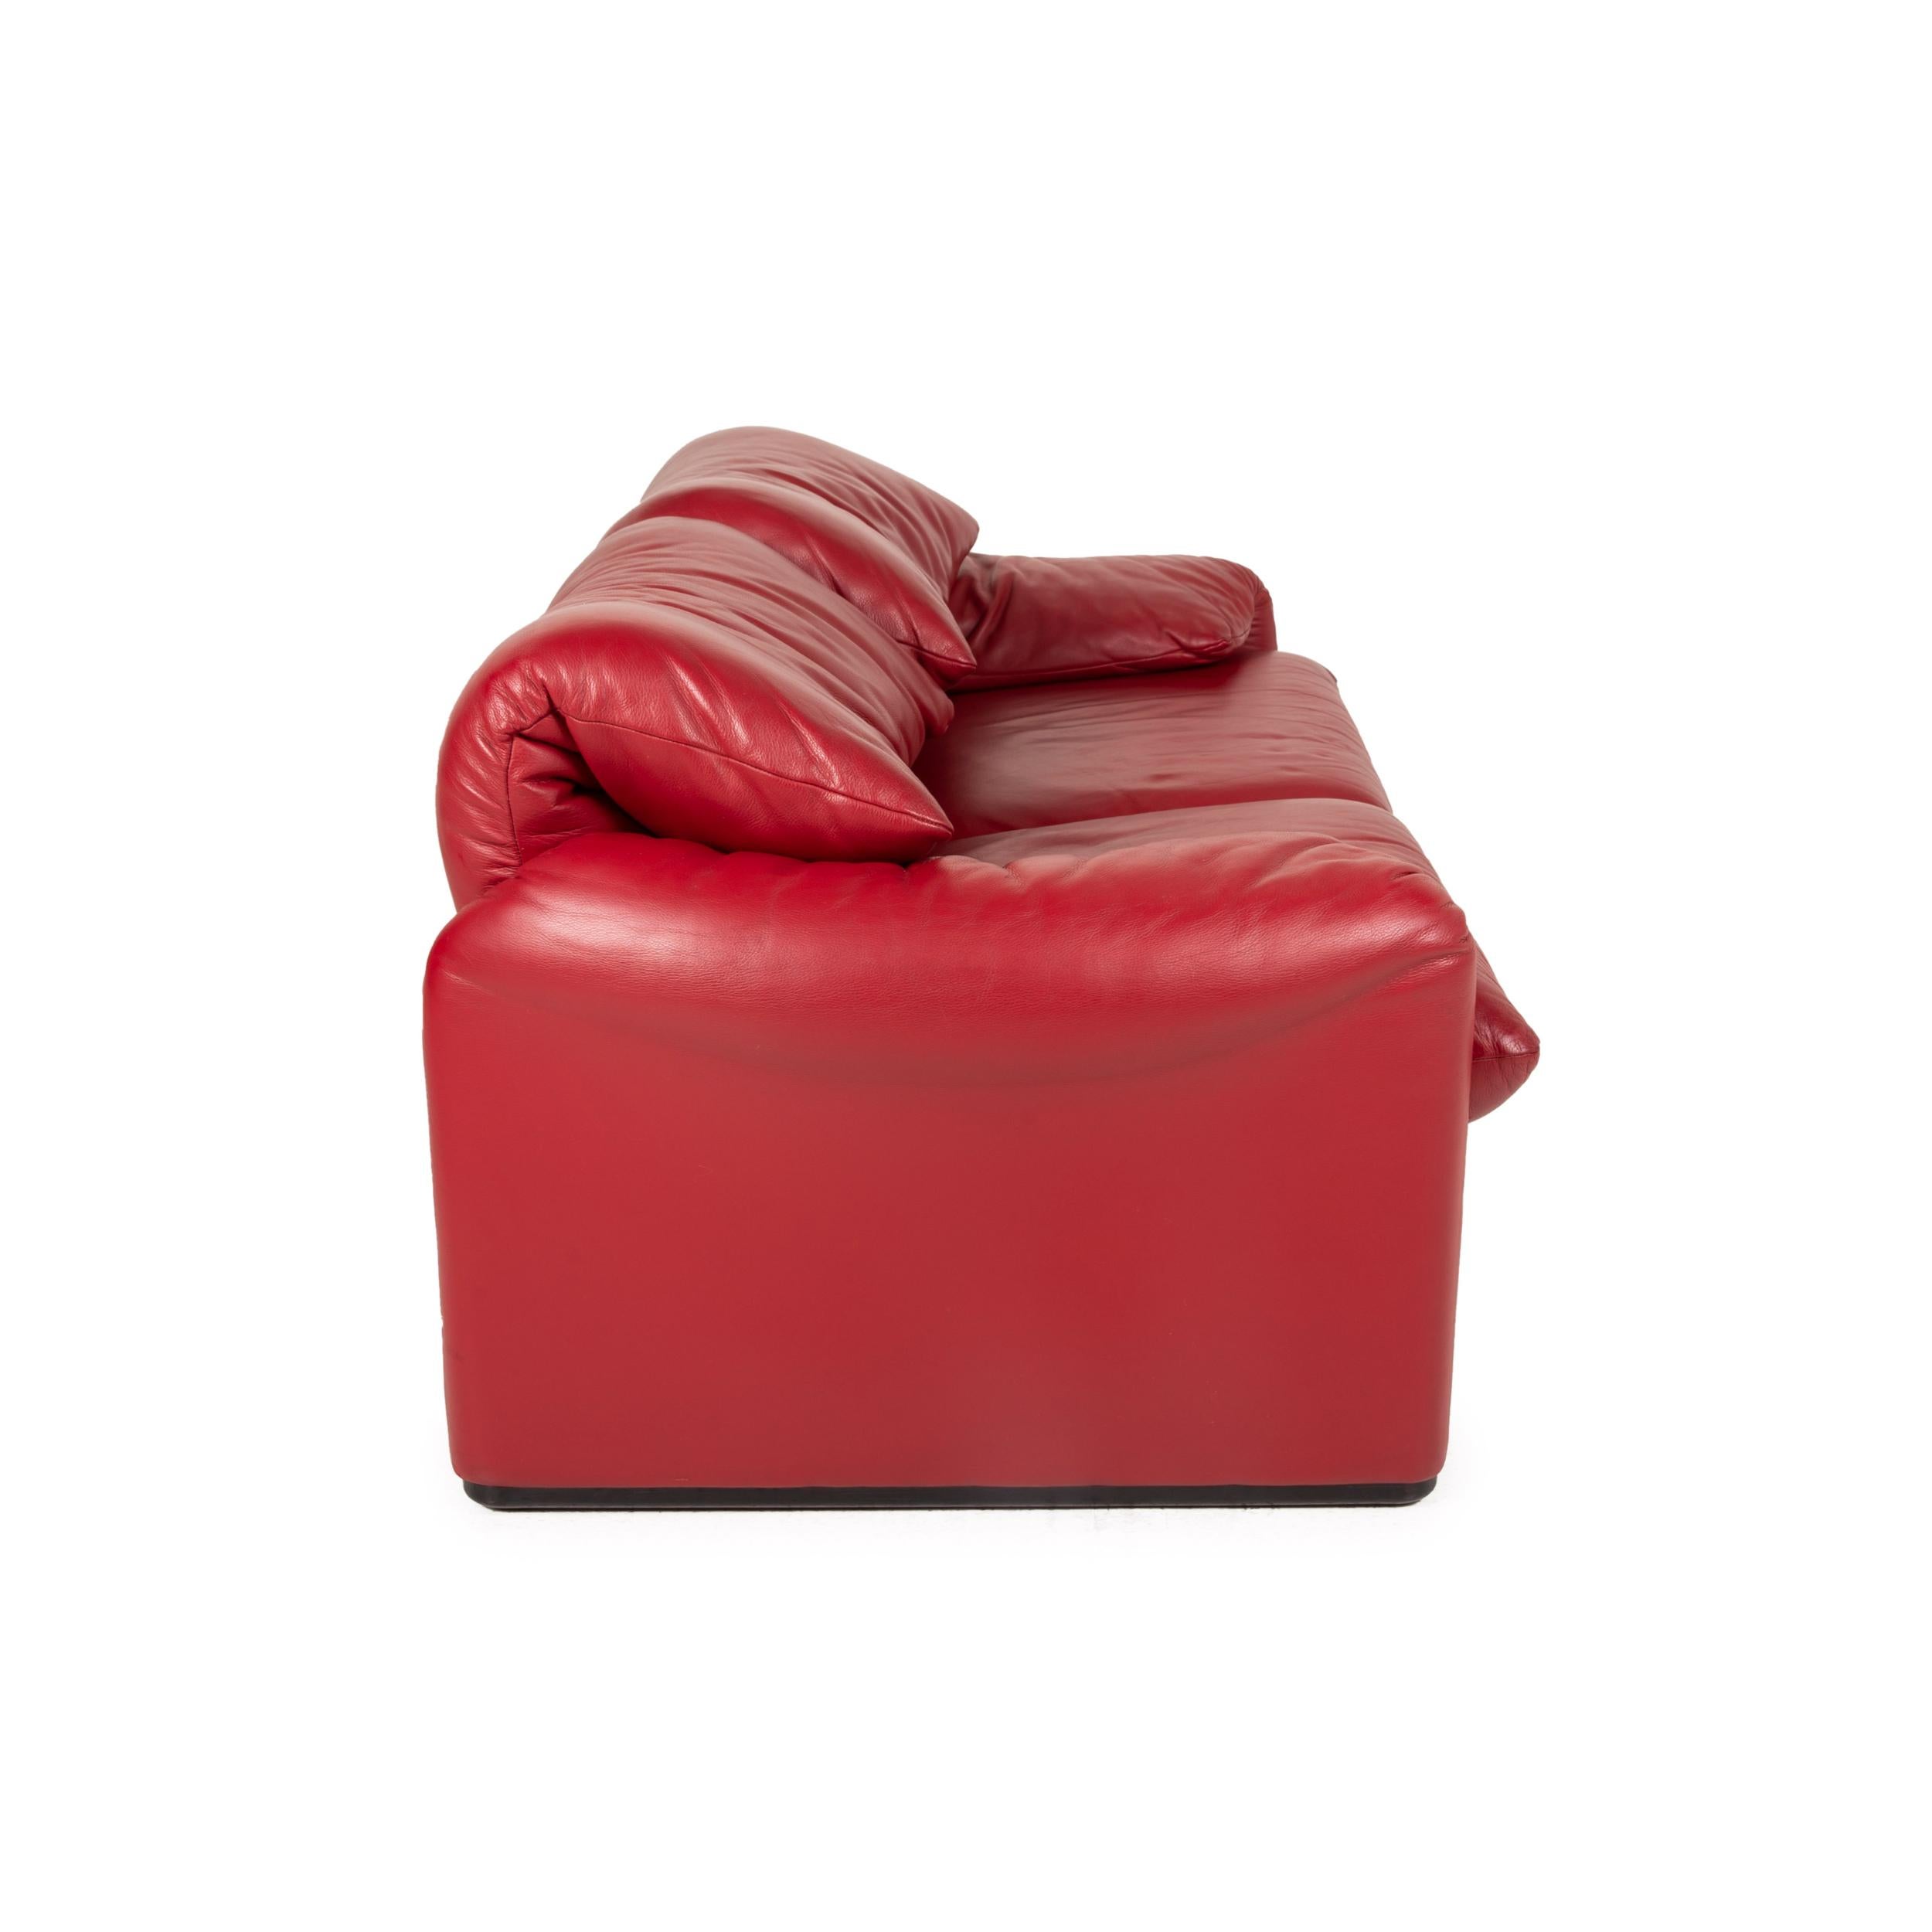 Cassina Maralunga Designer Leather Sofa Red Two-Seater Couch Function 1